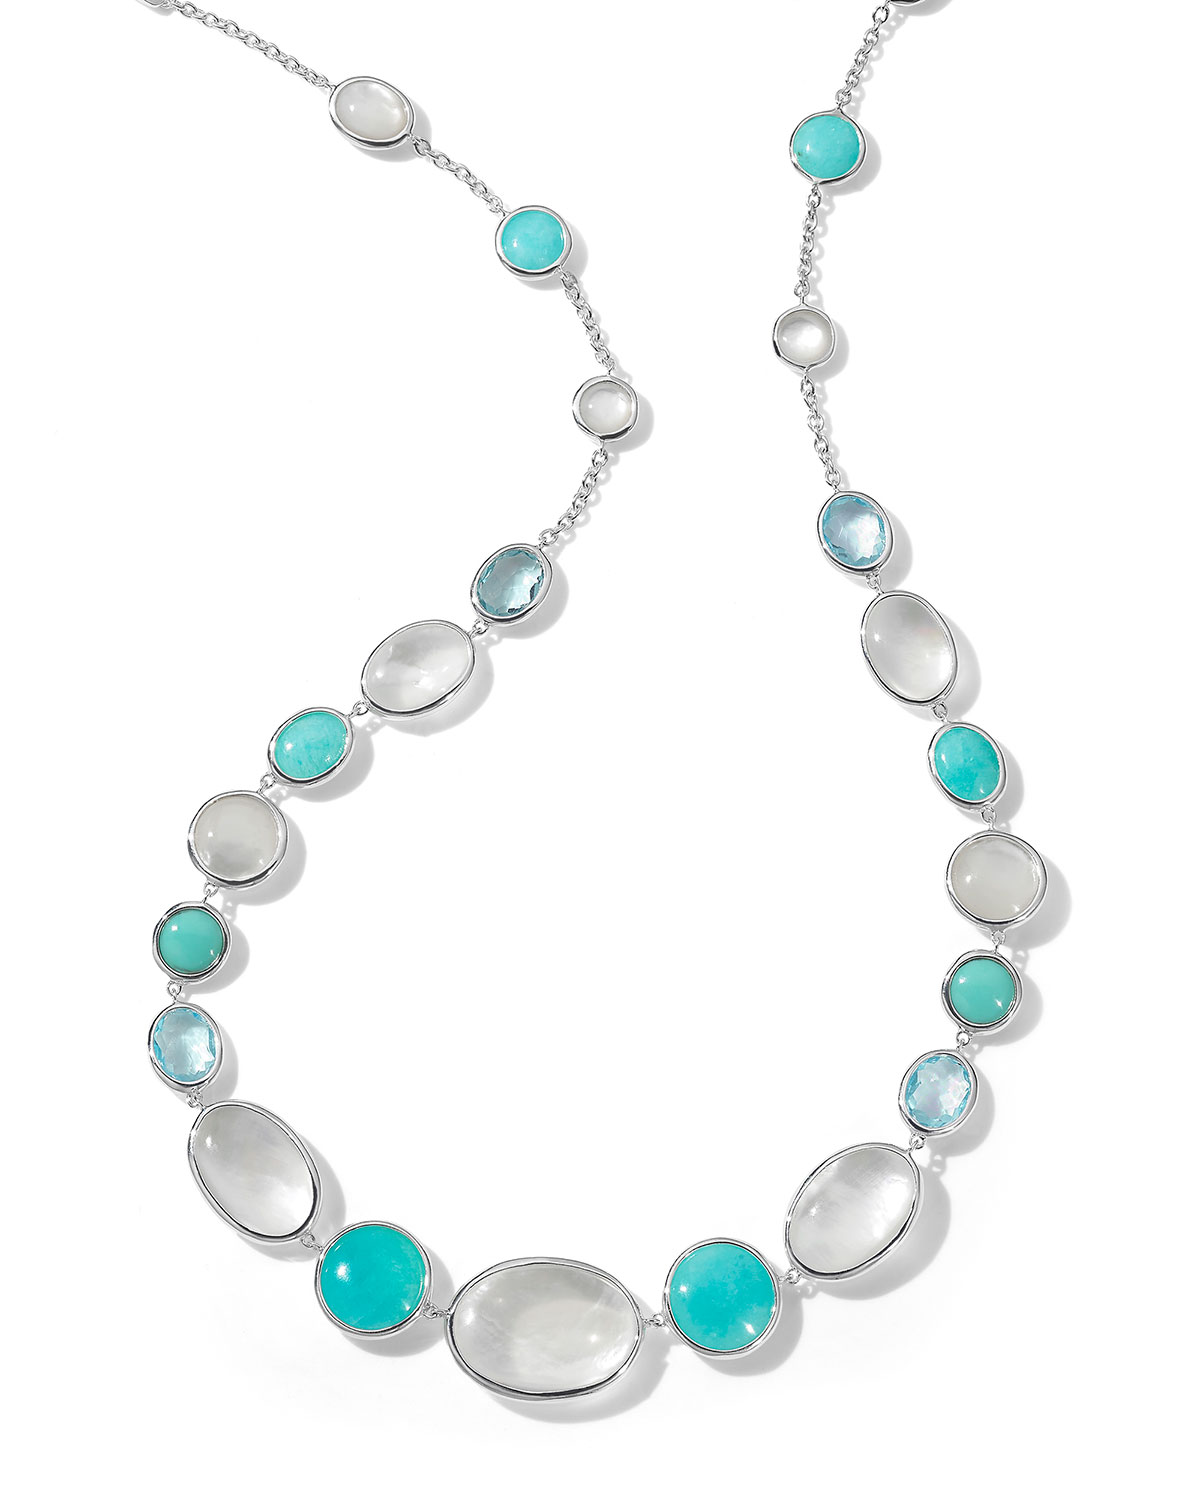 IPPOLITA ROCK CANDY LUCE 10-STONE LONG NECKLACE IN CASCATA,PROD239640246